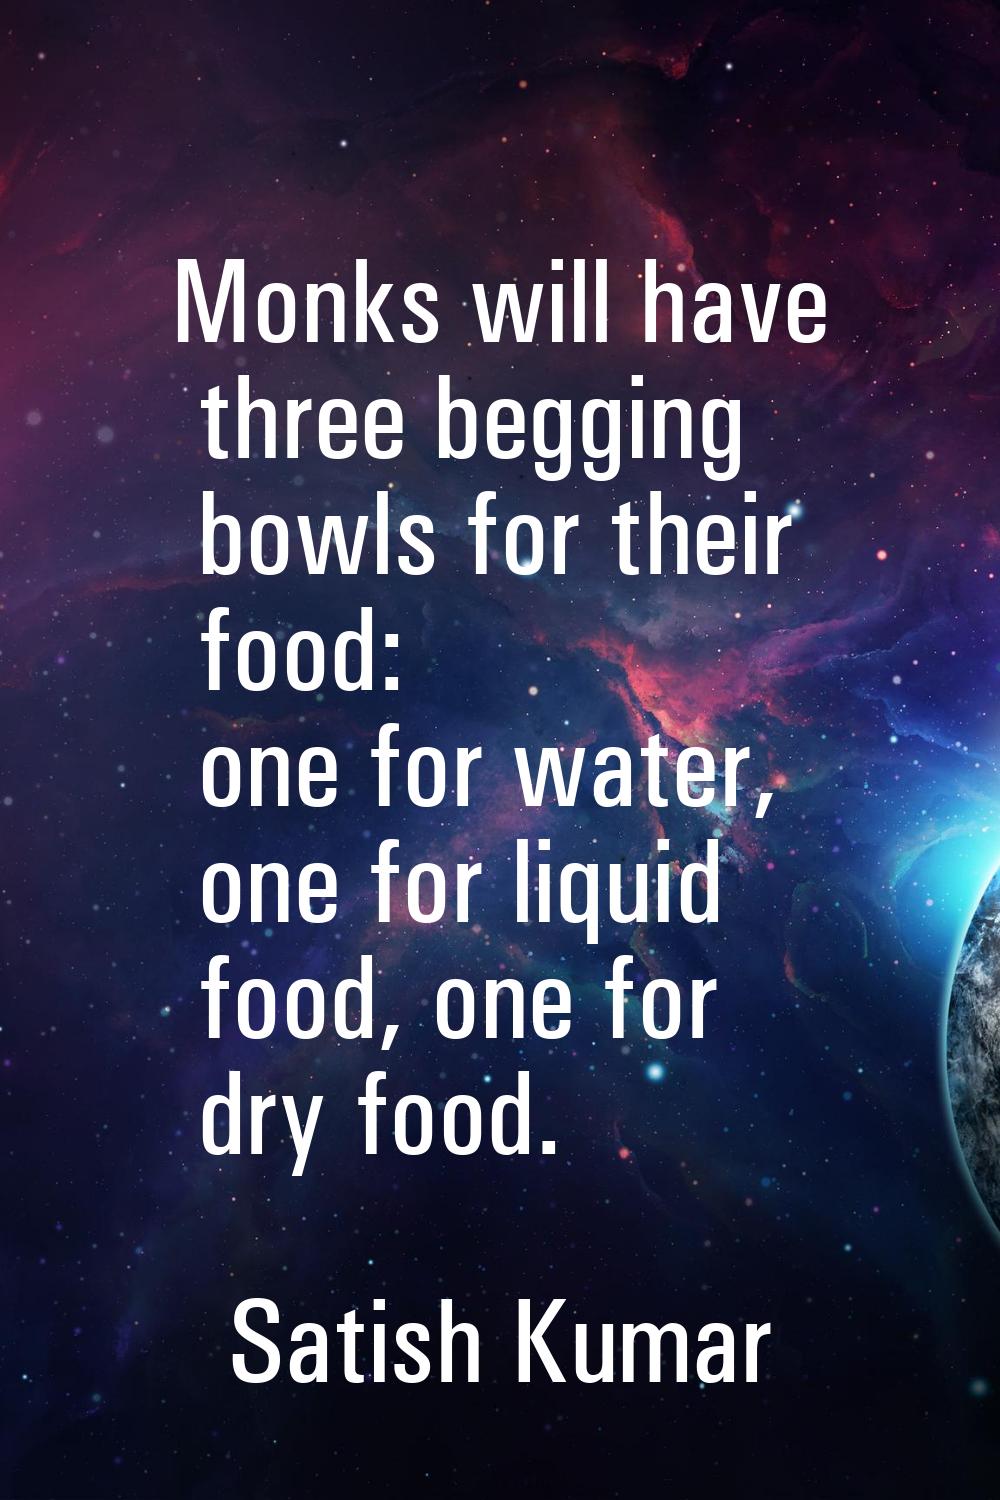 Monks will have three begging bowls for their food: one for water, one for liquid food, one for dry